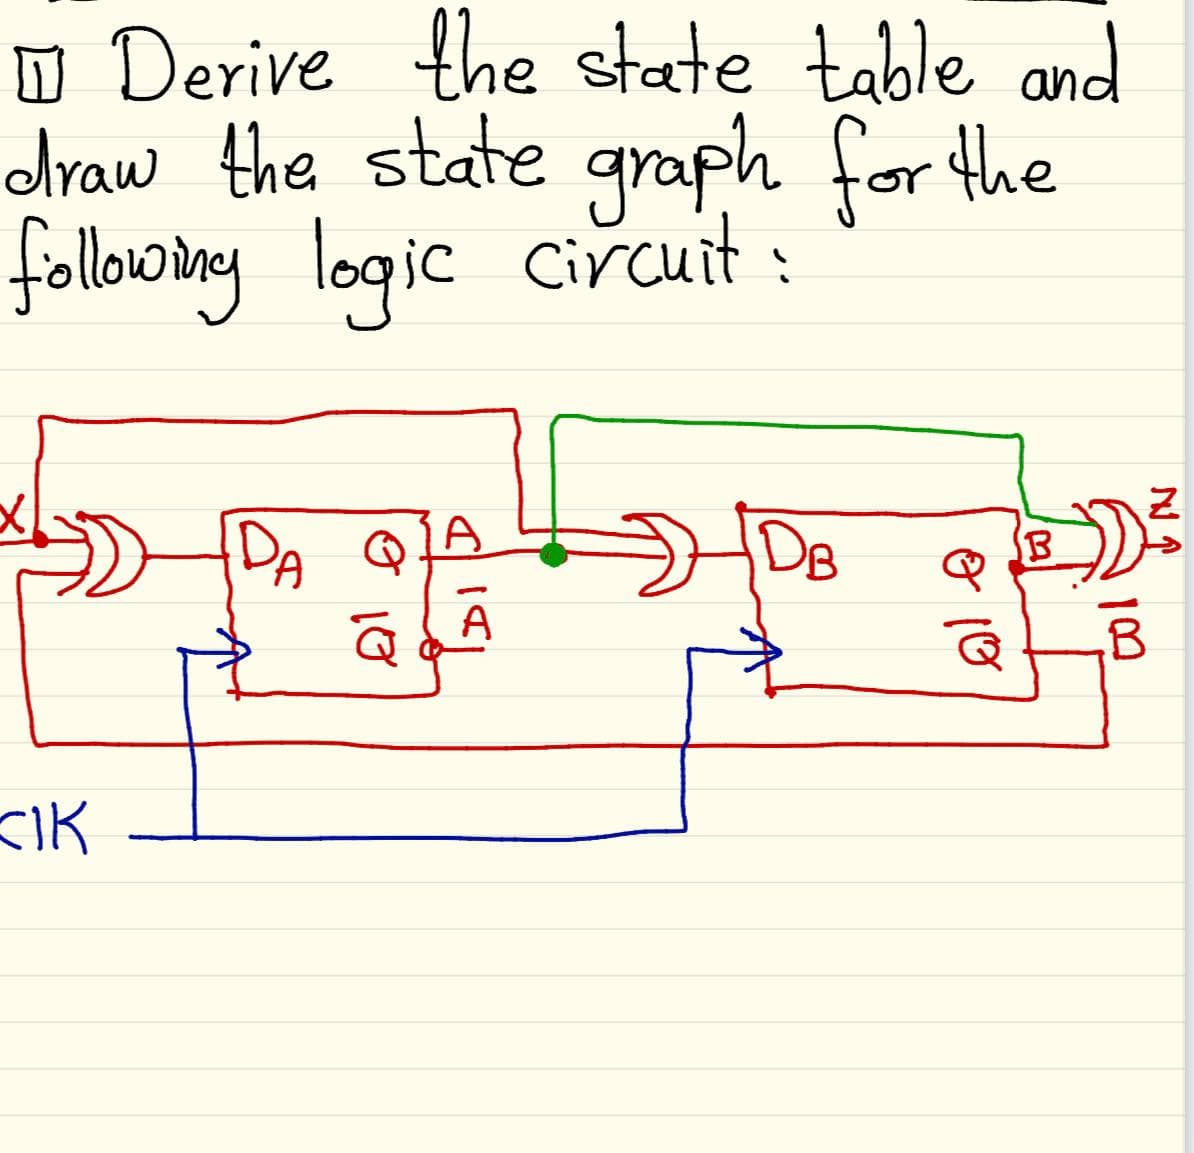 O Derive the state table and
draw the state graph for the
following logic circuit:
DA Q
A
DB
B
A
CIK
